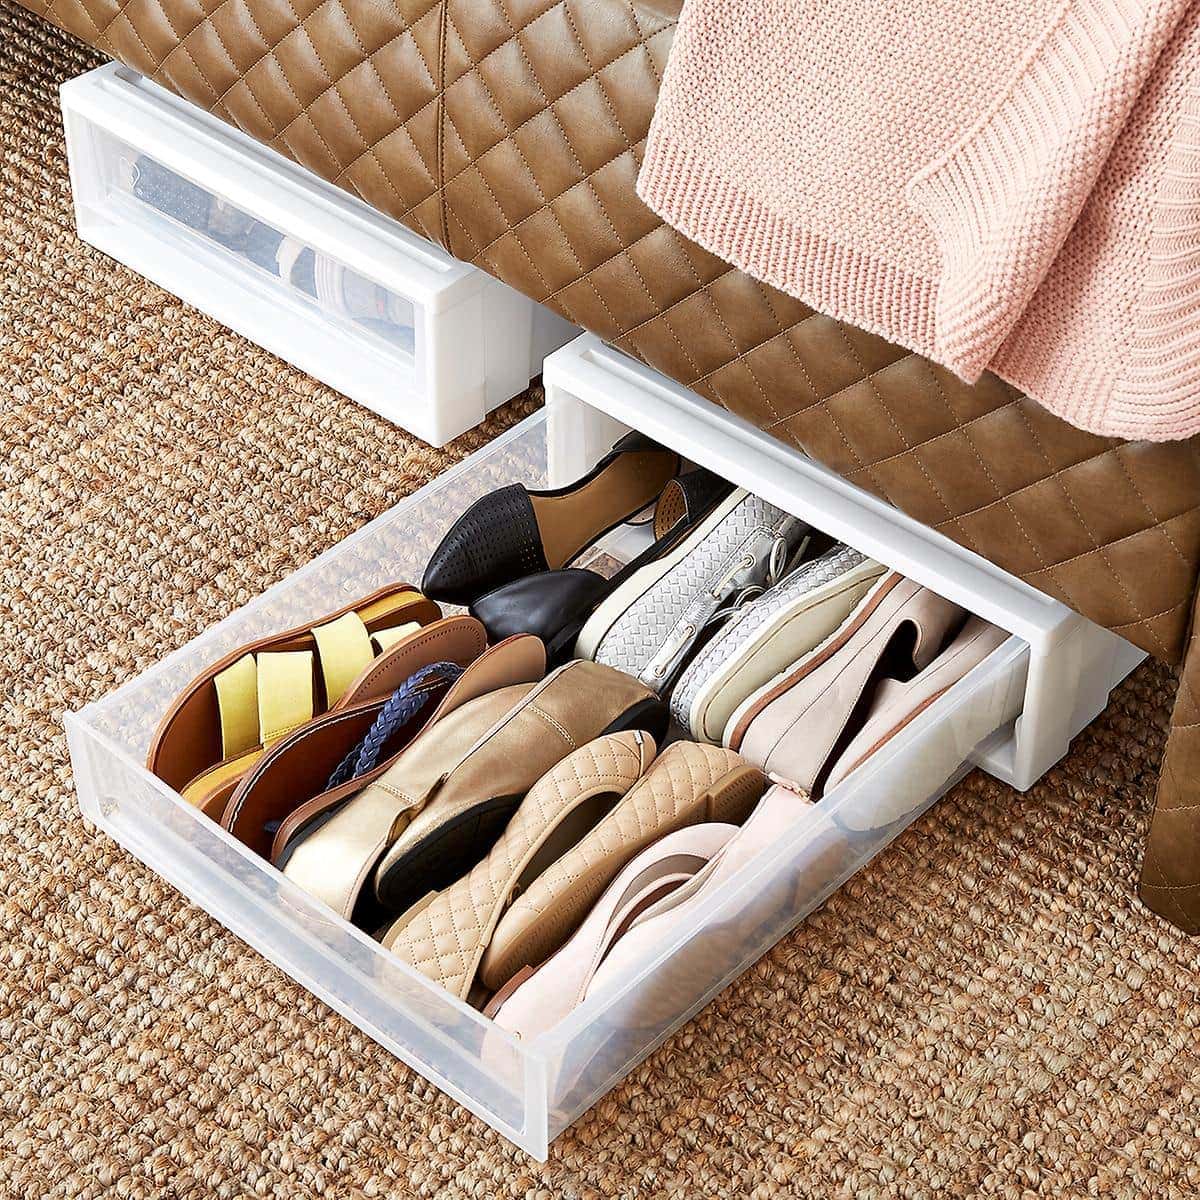 Under the Bed Storage Drawers